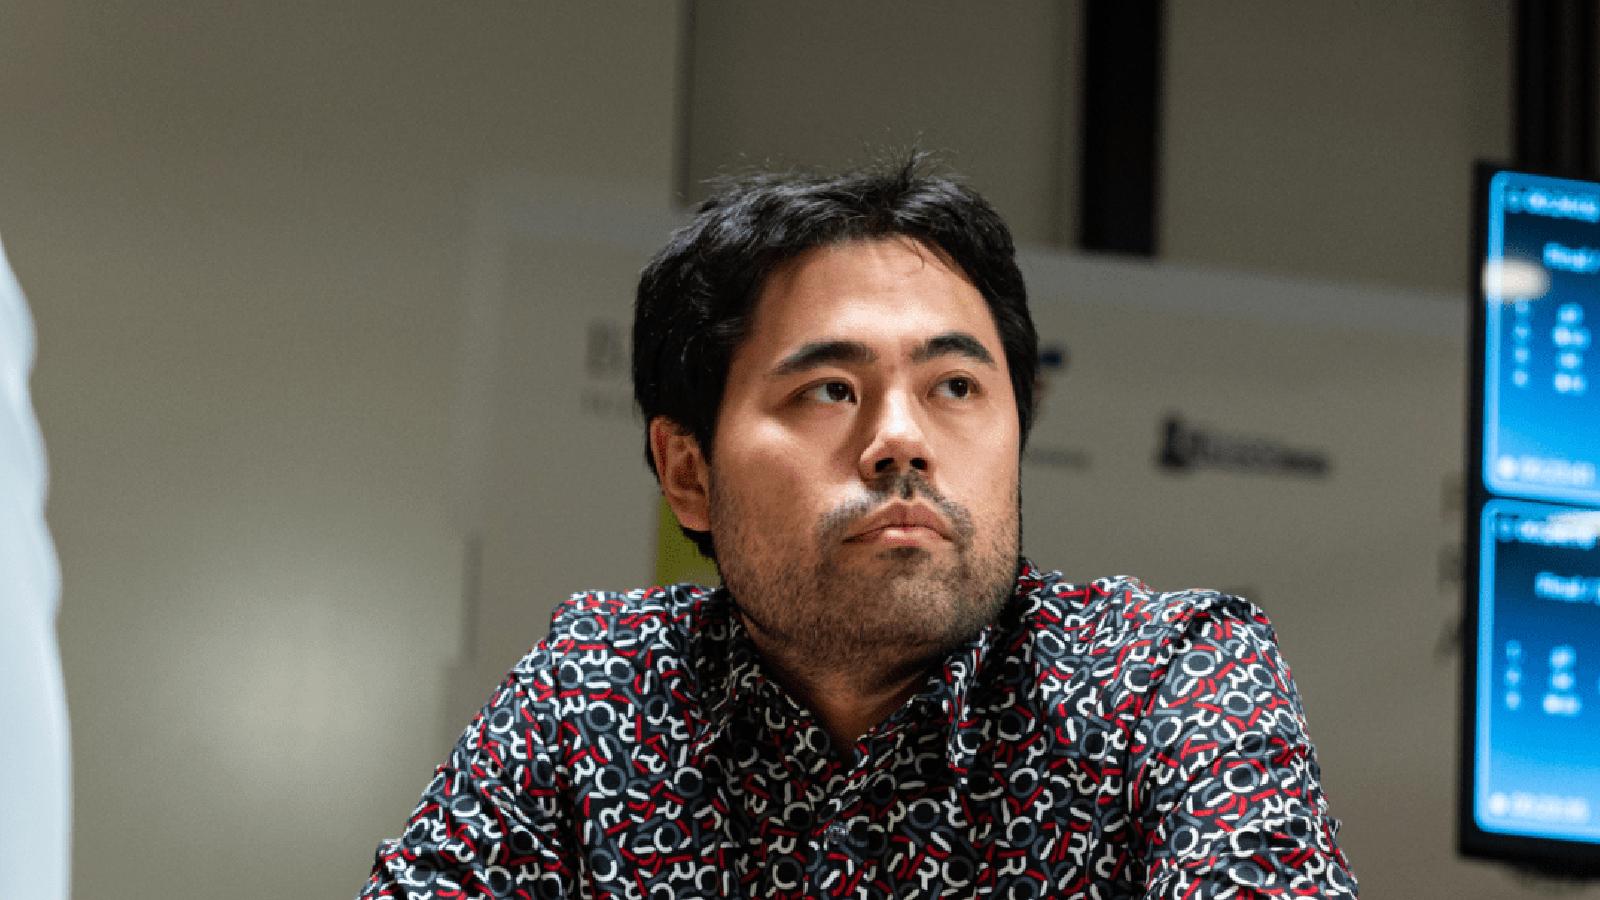 Chess Grandmaster claims Hikaru accused a young prodigy of cheating amid allegations